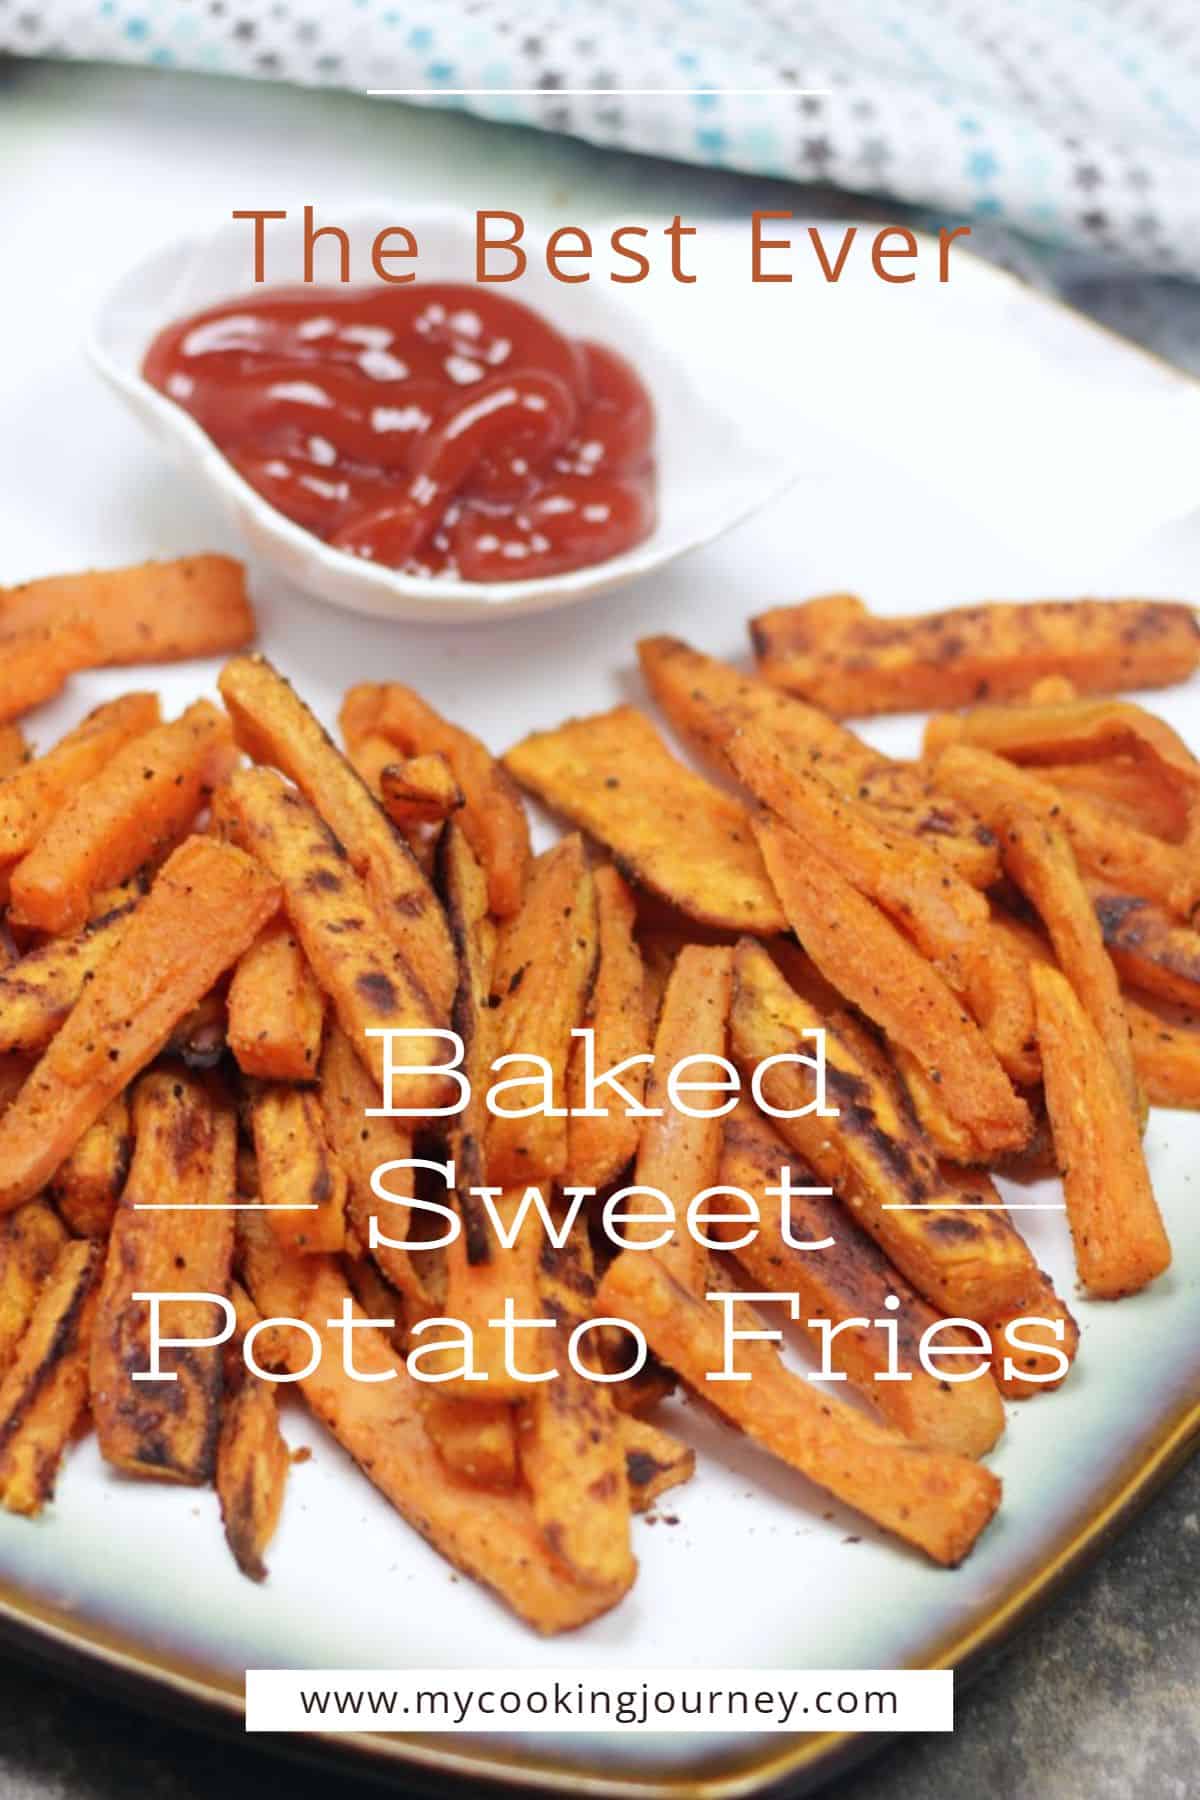 Oven Baked Sweet Potato Fries - My Cooking Journey